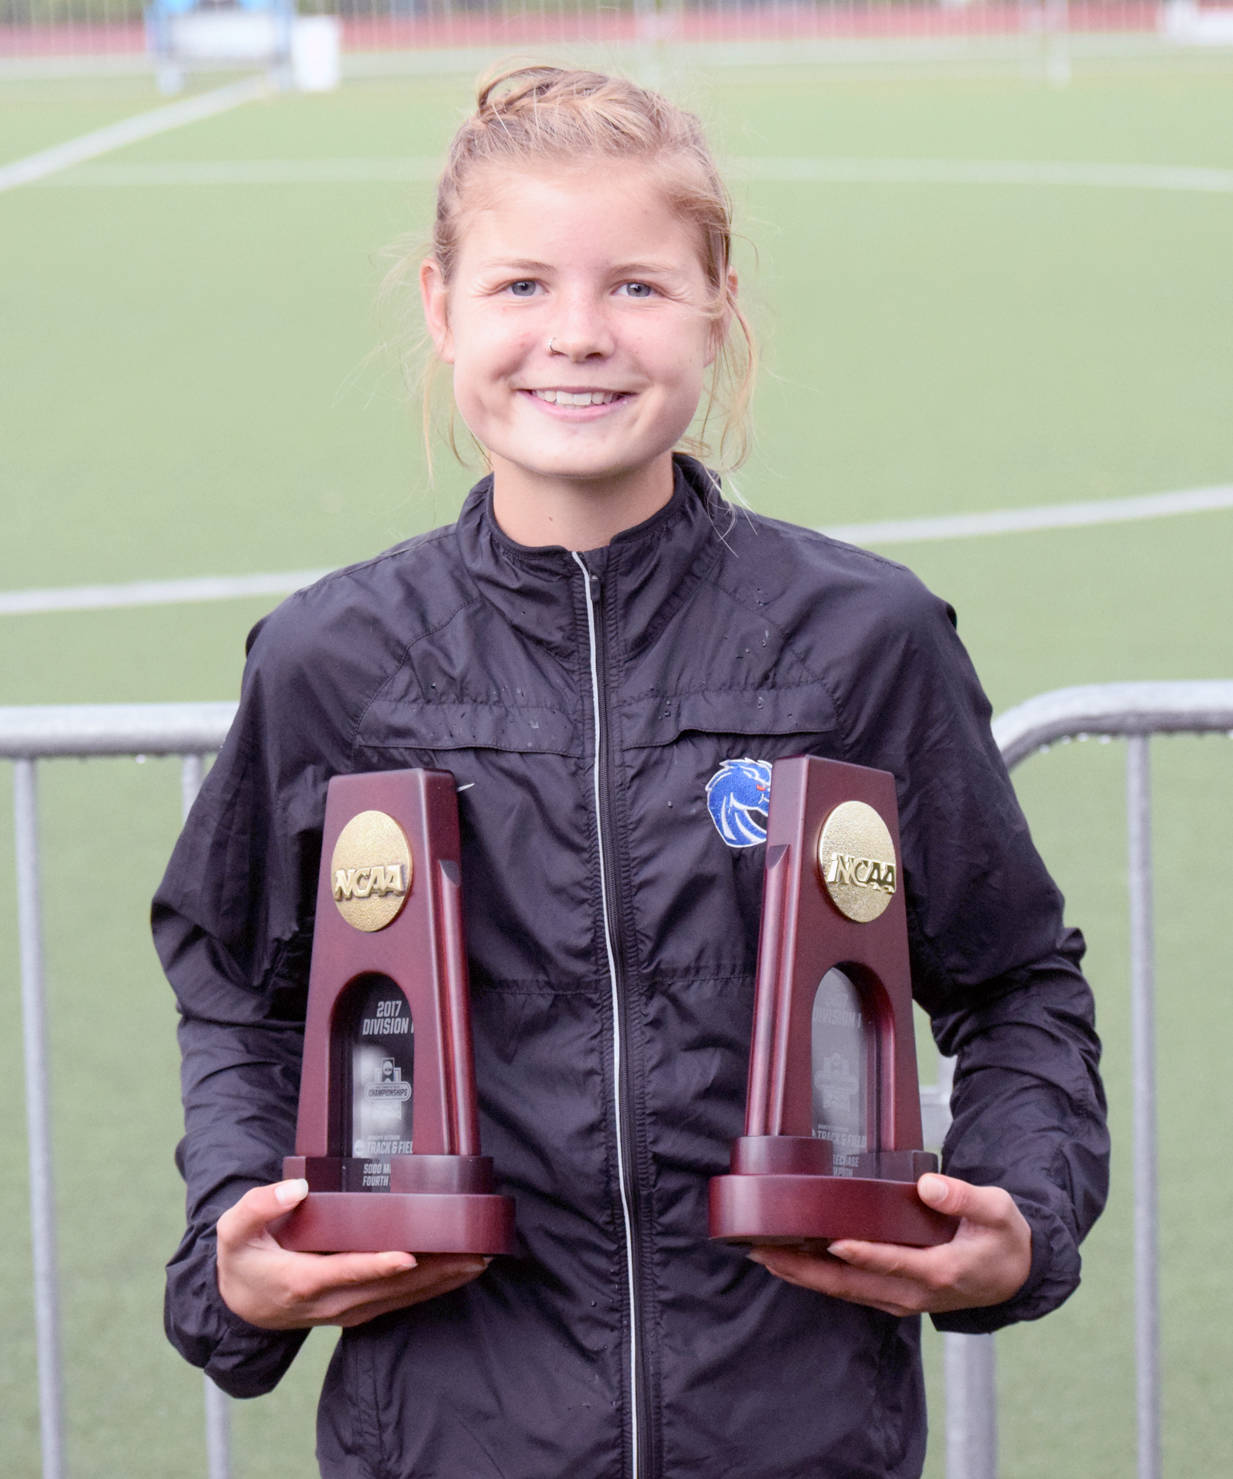 Boise State redshirt freshman Allie Ostrander shows off the first-place trophy from the 3,000-meter steeplechase and fourth-place trophy from the 5,000 meters, both earned at the NCAA Outdoor Track and Field Championship on Saturday, June 10, 2017, at Hayward Field in Eugene, Oregon. (Photo provided by Boise State Sports Information)